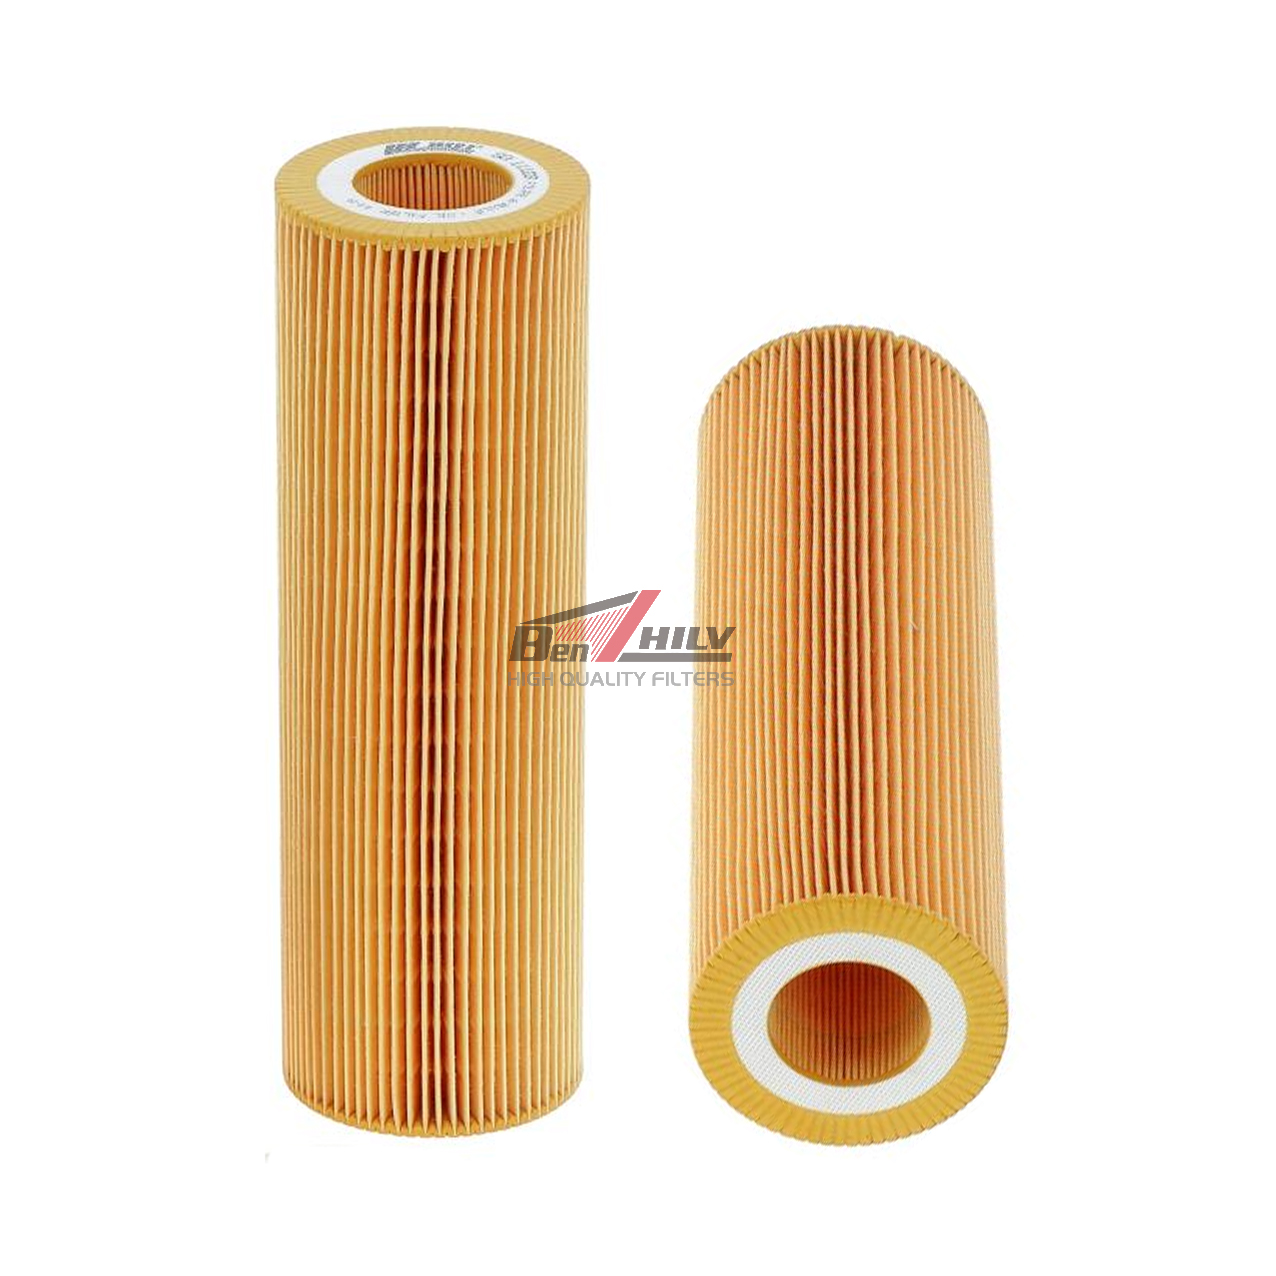 1742032 1742037 2022275 2037556 2625883 2625884 2659264 LUBRICATE THE OIL FILTER ELEMENT